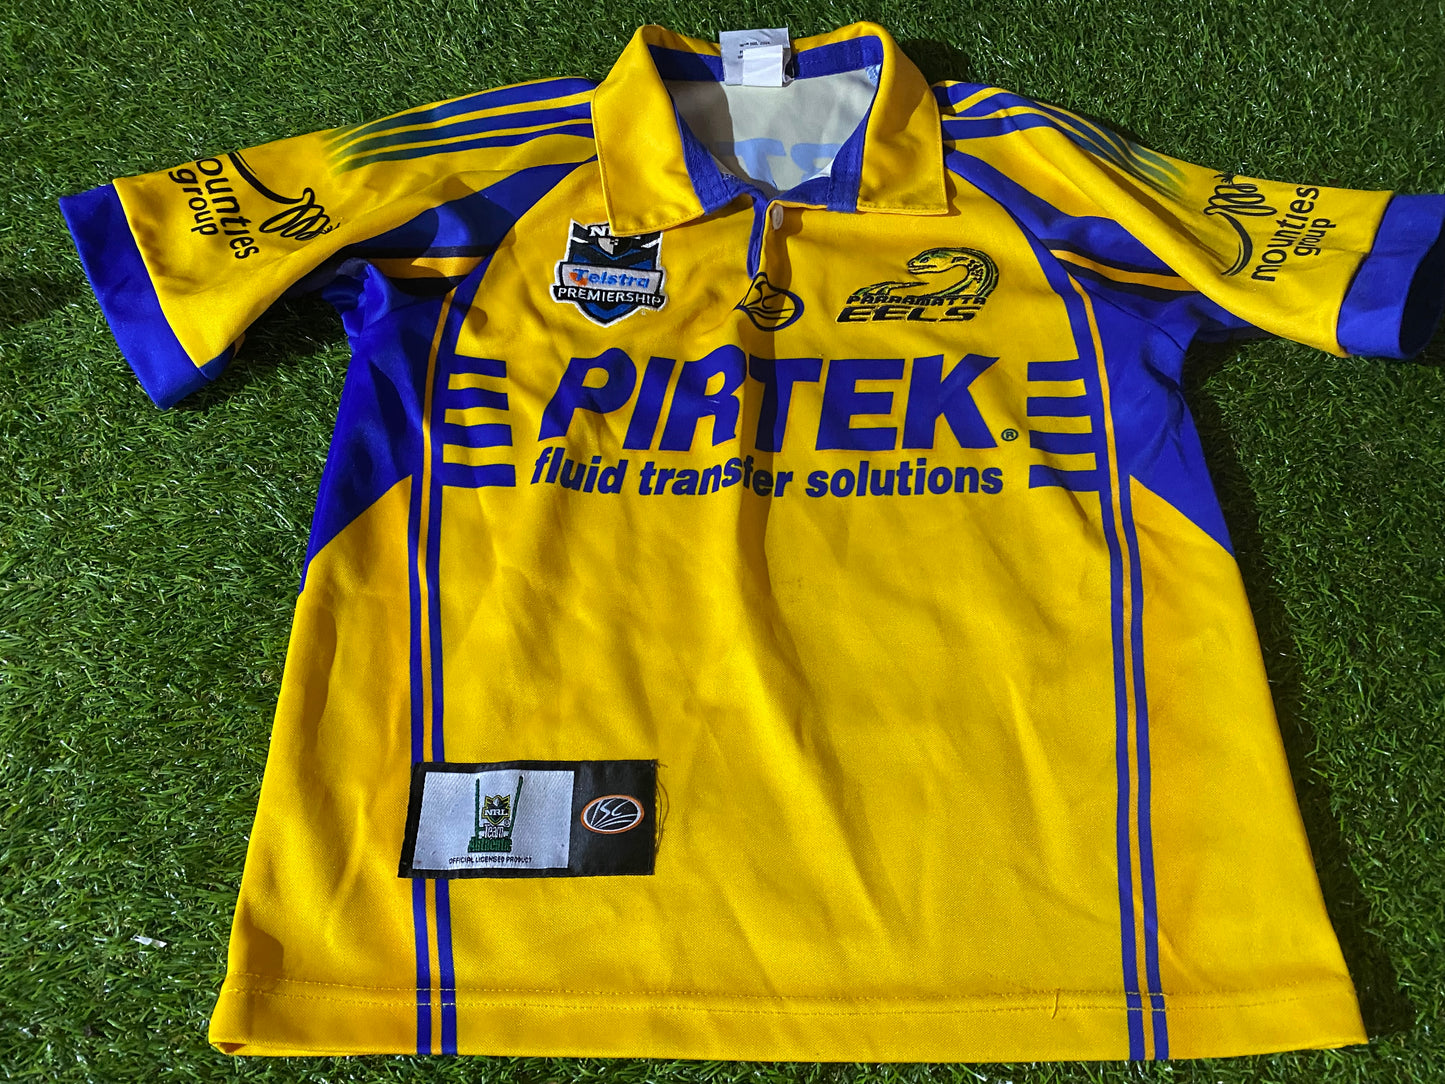 Paramata Eeels NRL Rugby League Football Large Boys 10-11 Year Old Jersey